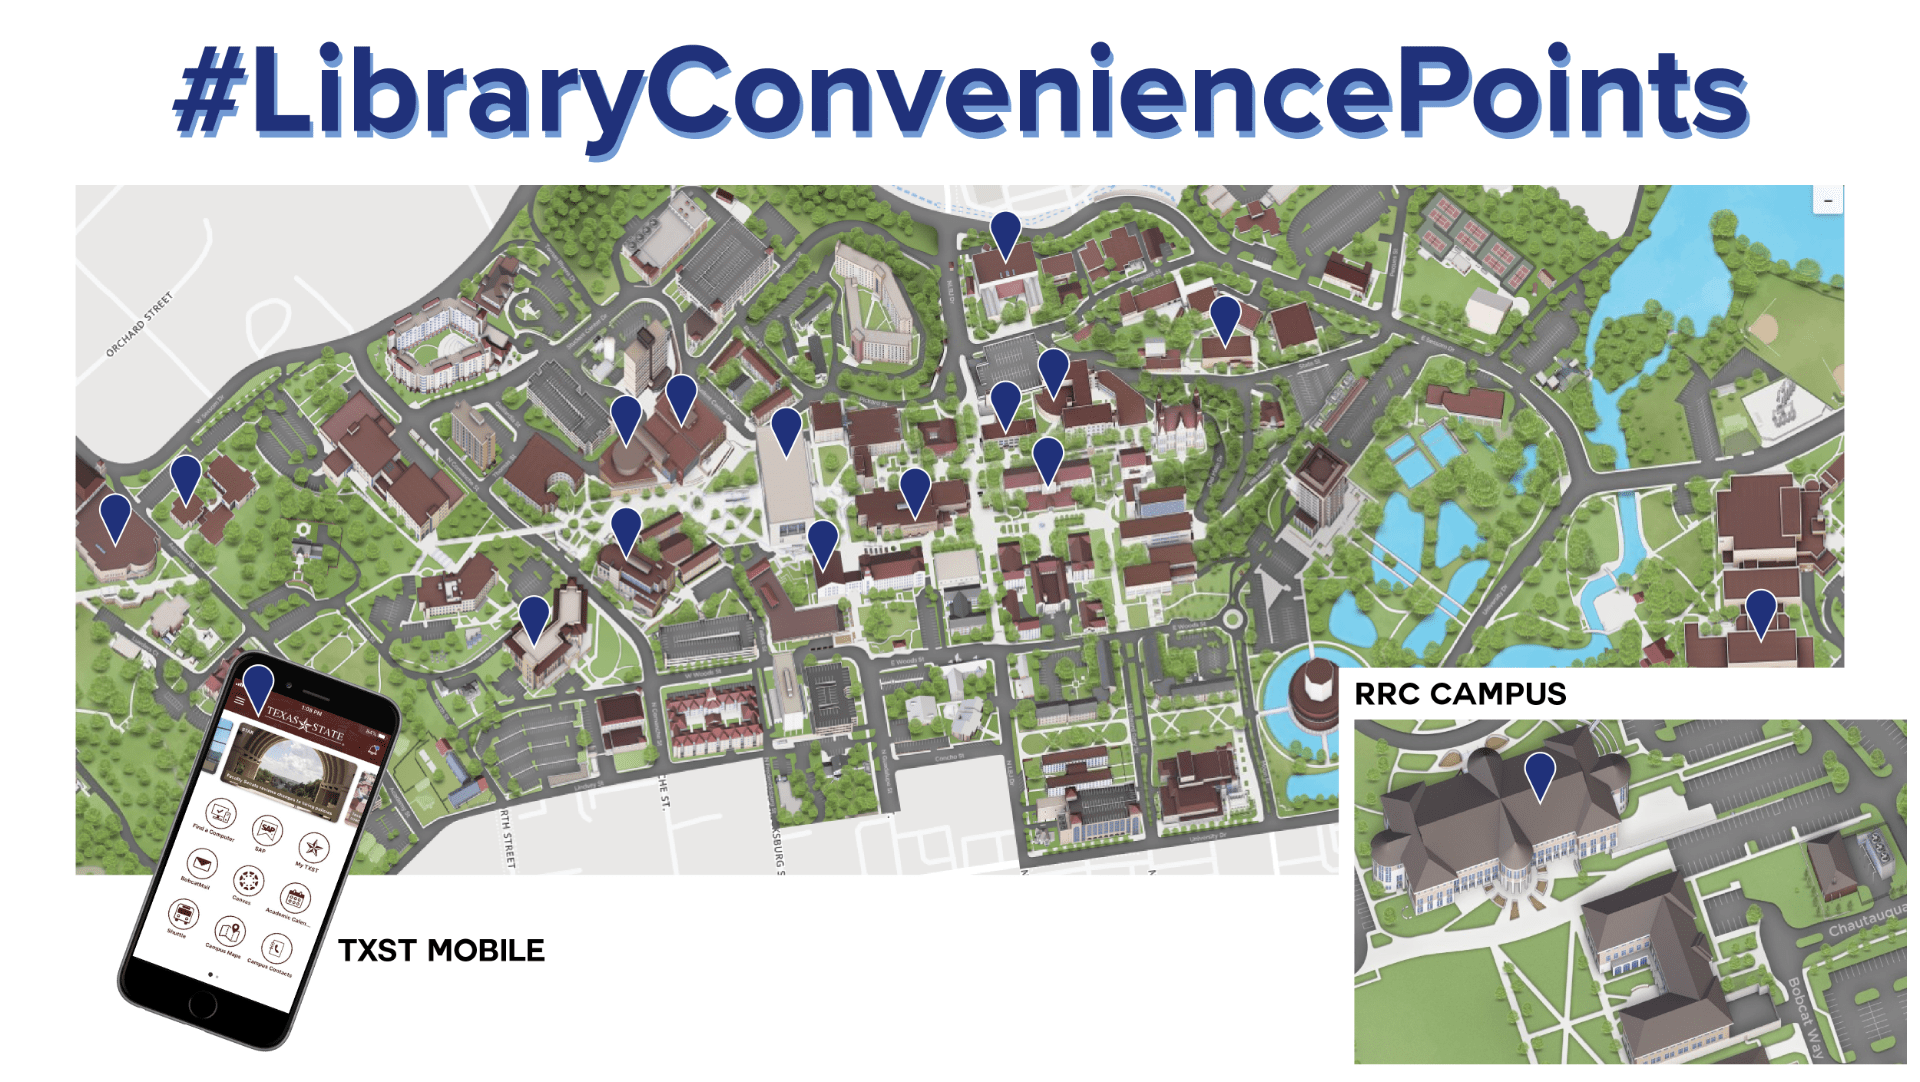 Map of campus showing various points where conveniences have been added.